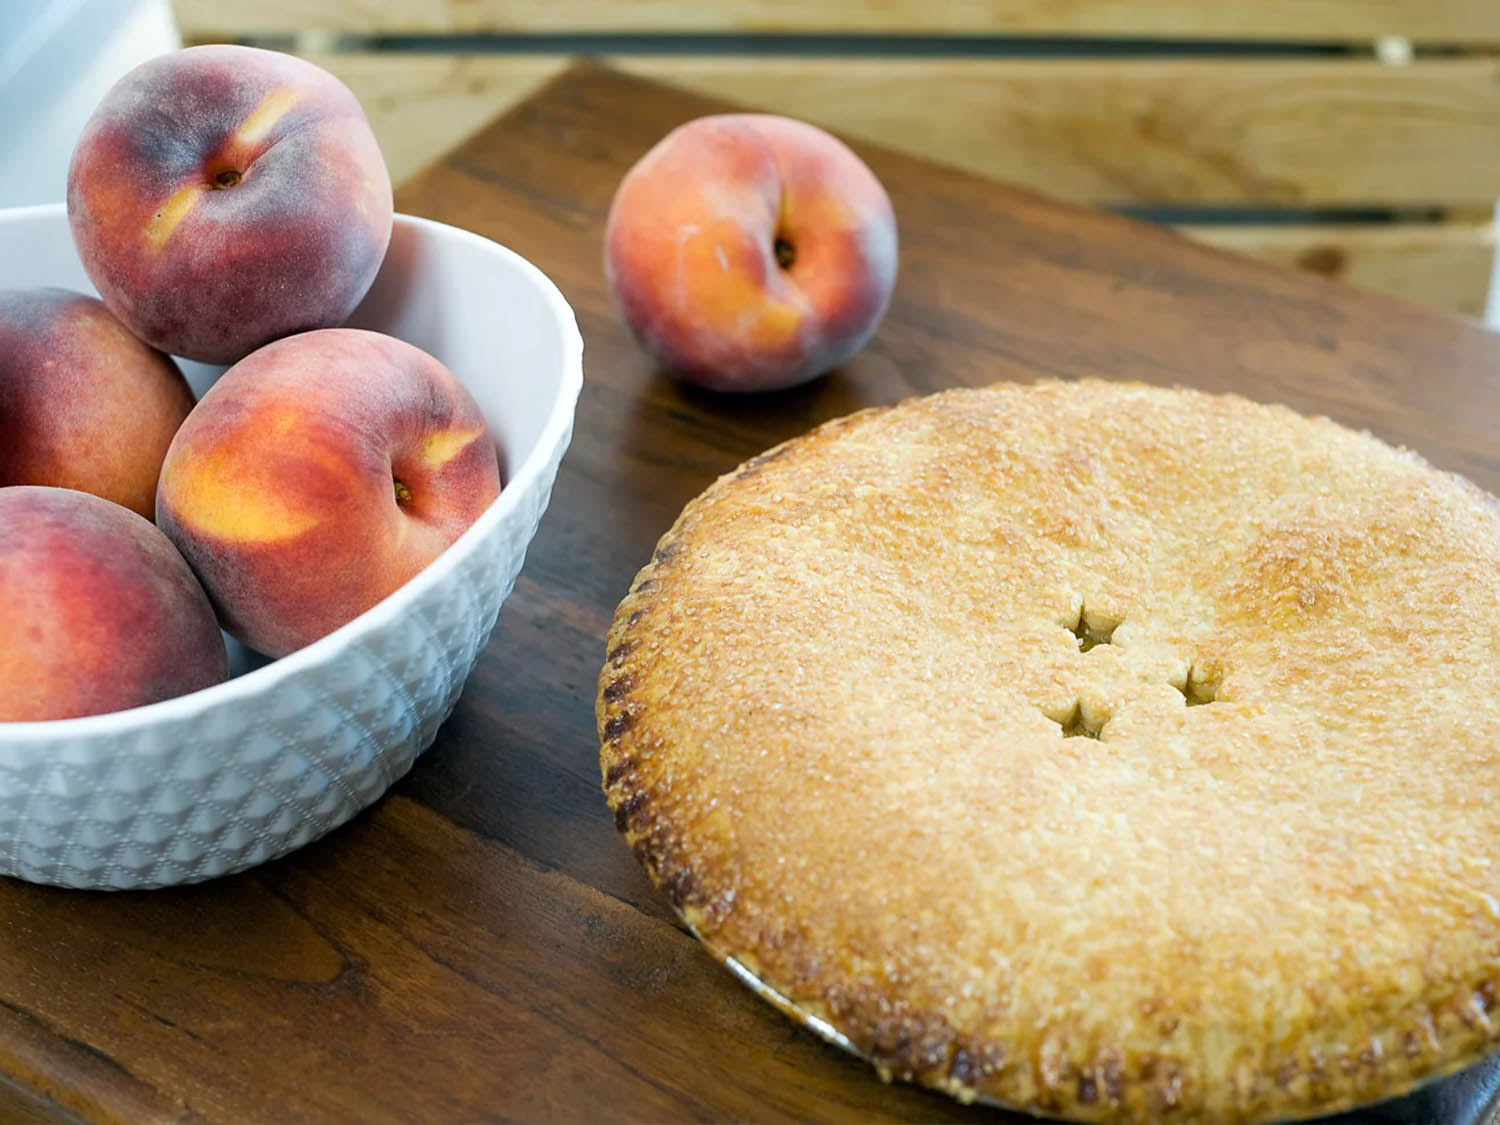 Papa C Pies - Peaches and Cream? Sounds like Peach Pie Day!